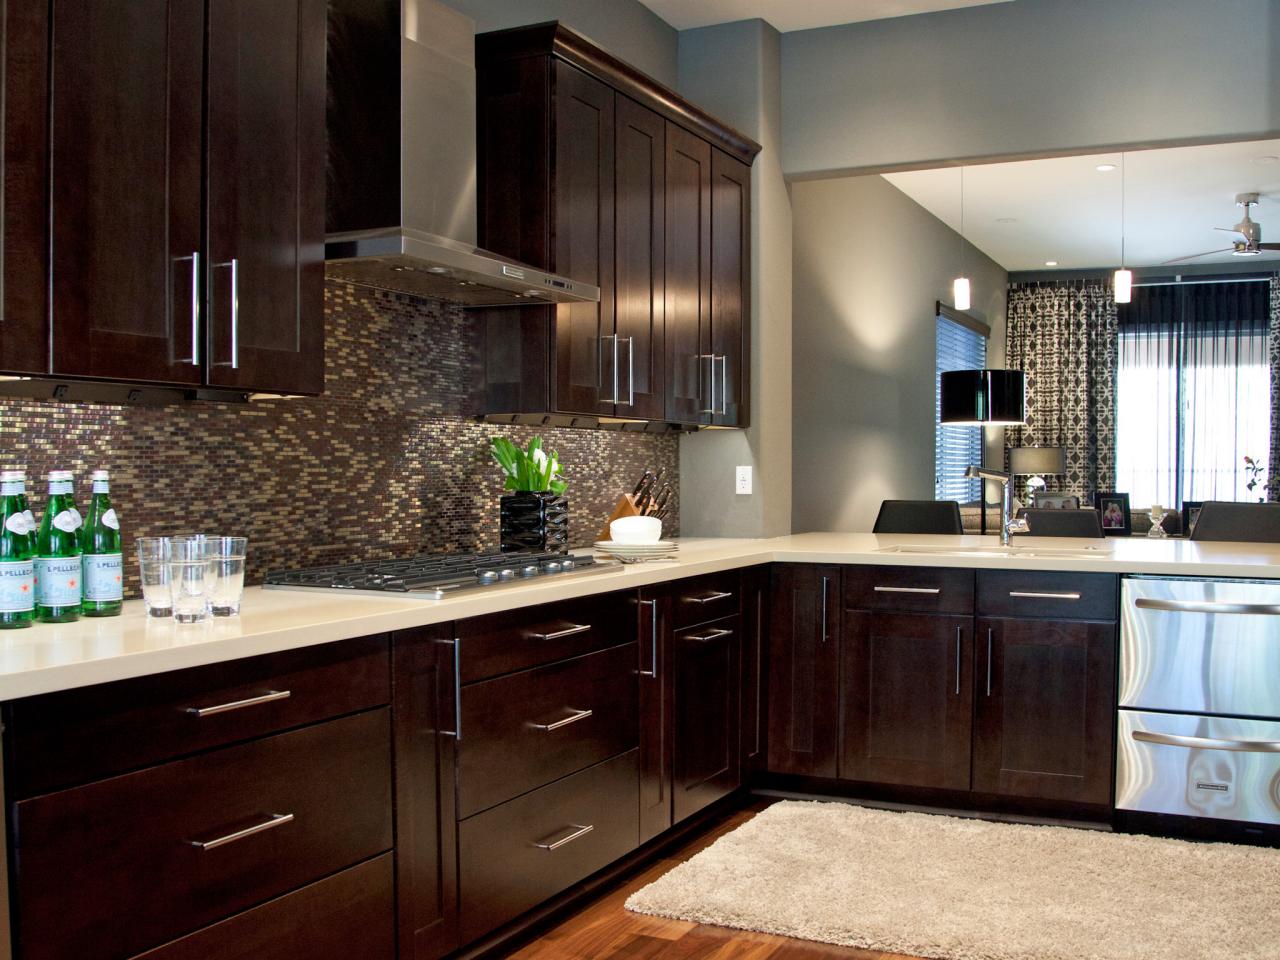 Espresso Kitchen Cabinets Pictures, What Is A Good Color For Kitchen With Dark Cabinets